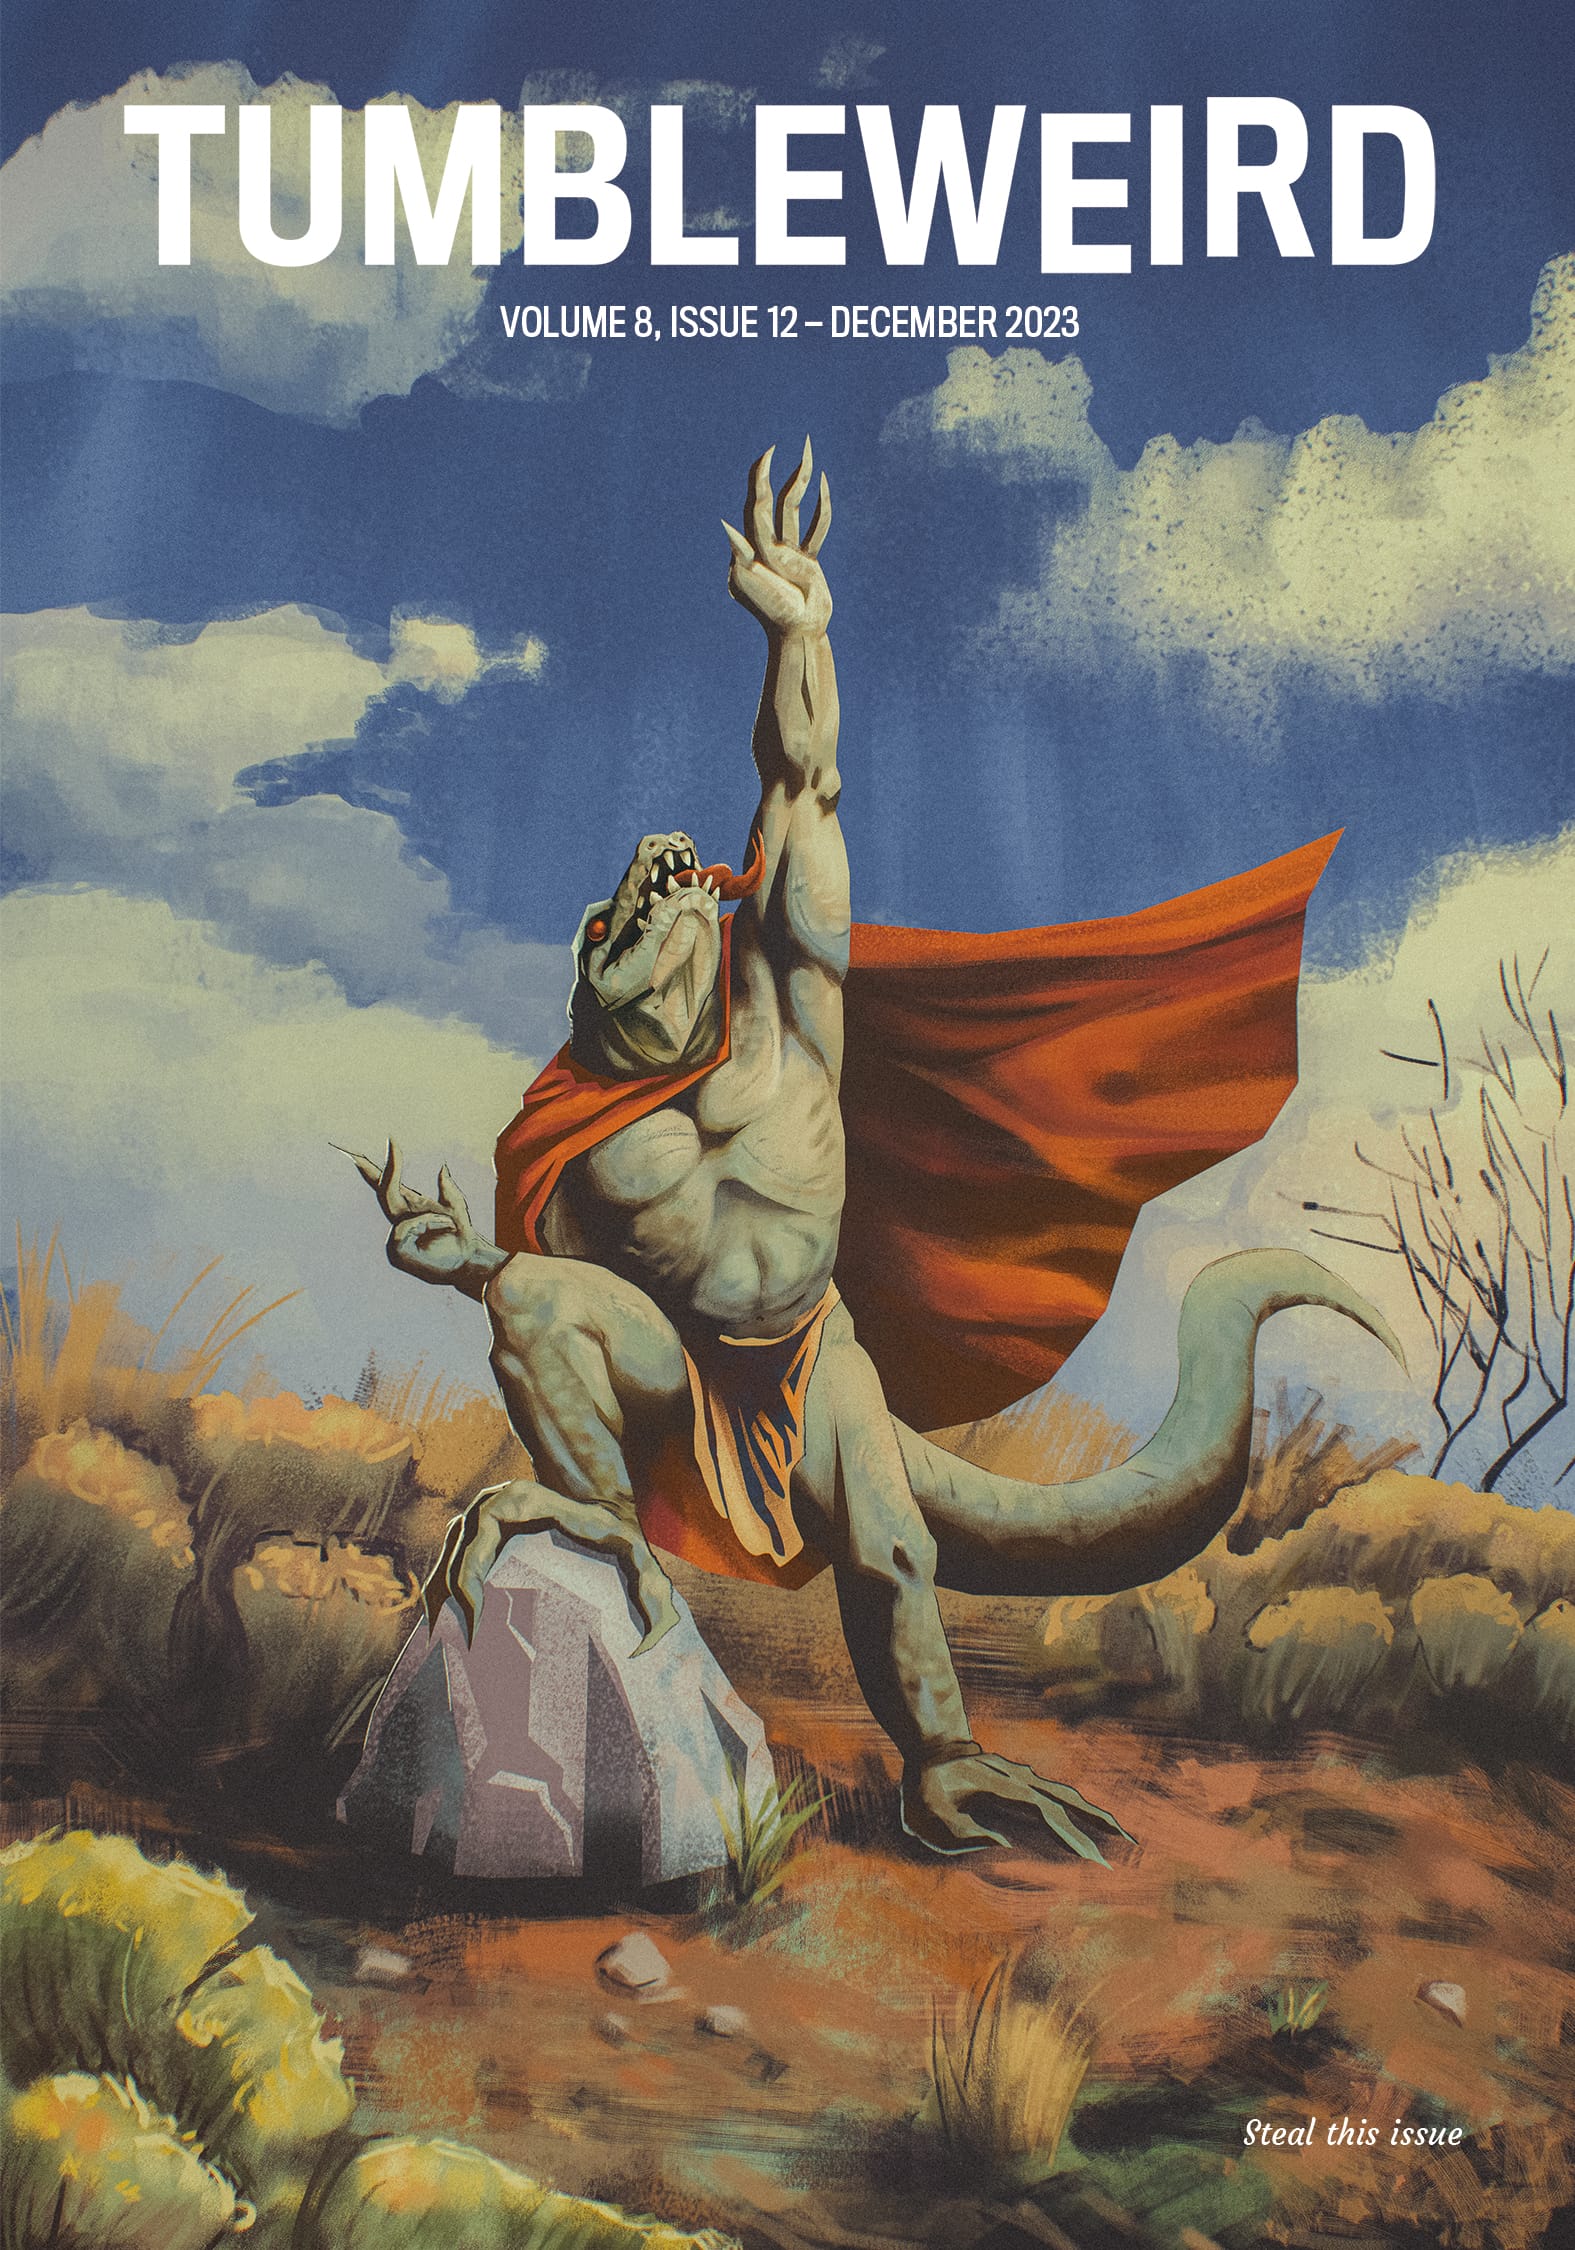 Illustration of lizard man in a red cape reaching up toward the light. “TUMBLEWEIRD: VOLUME 8, ISSUE 12 – DECEMBER 2023”